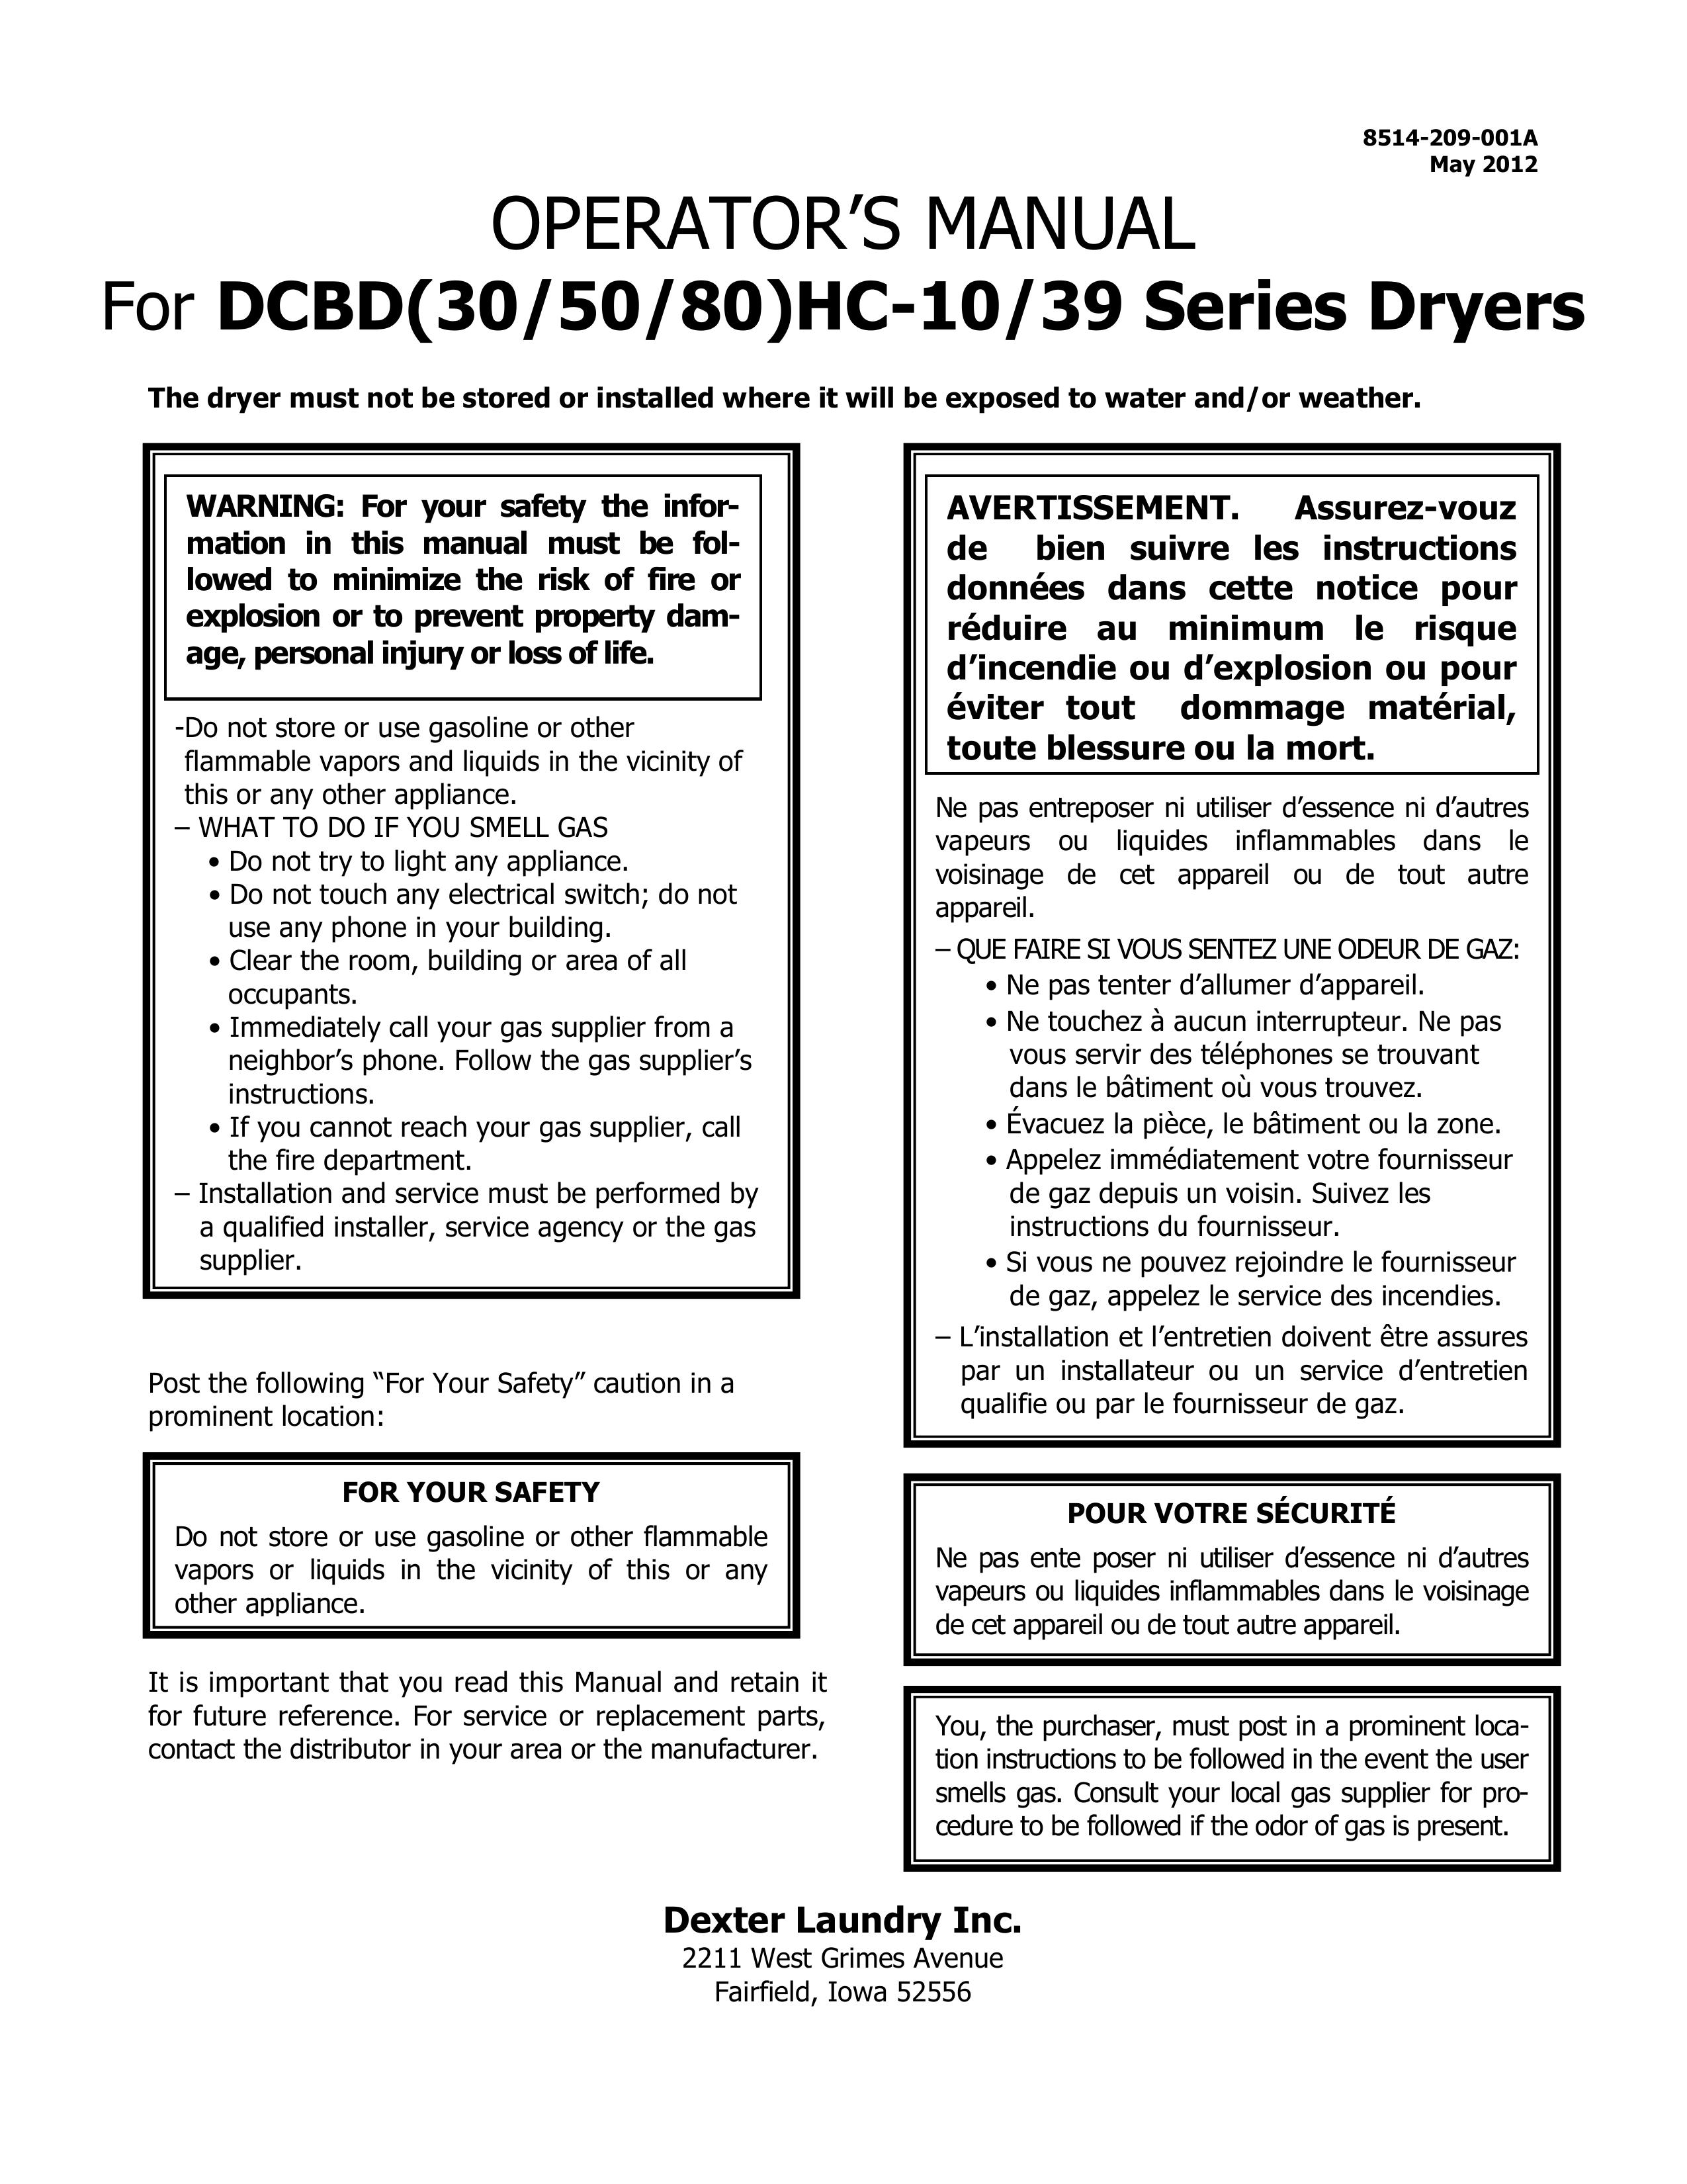 MRV Communications DCBD 50 Clothes Dryer User Manual